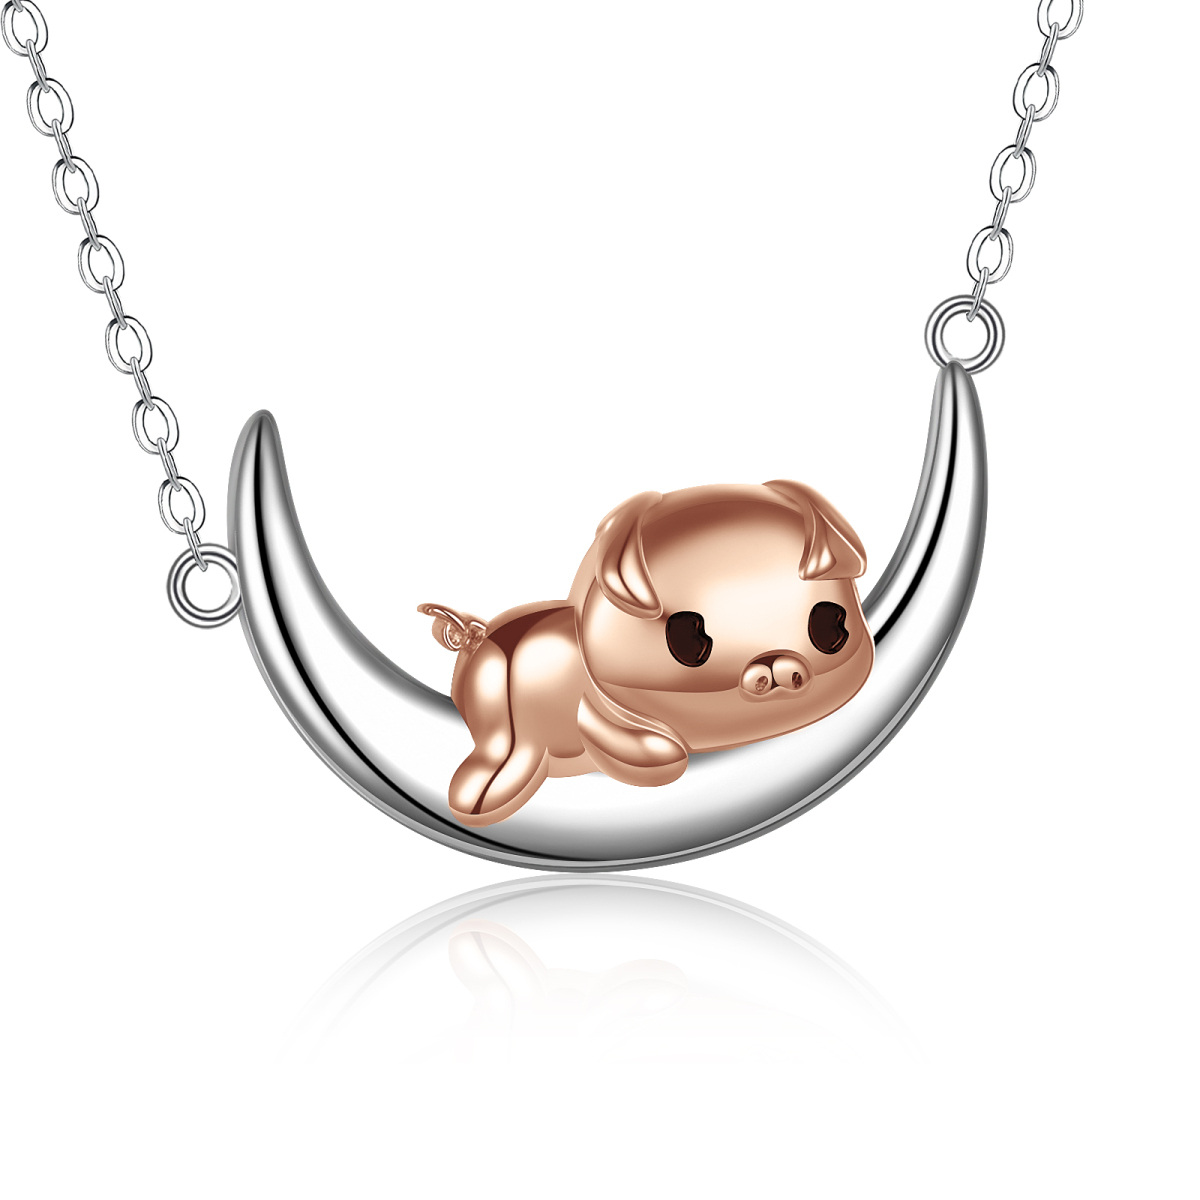 Pig Necklace 925 Sterling Silver Piggy Jewelry Gifts for Women-1